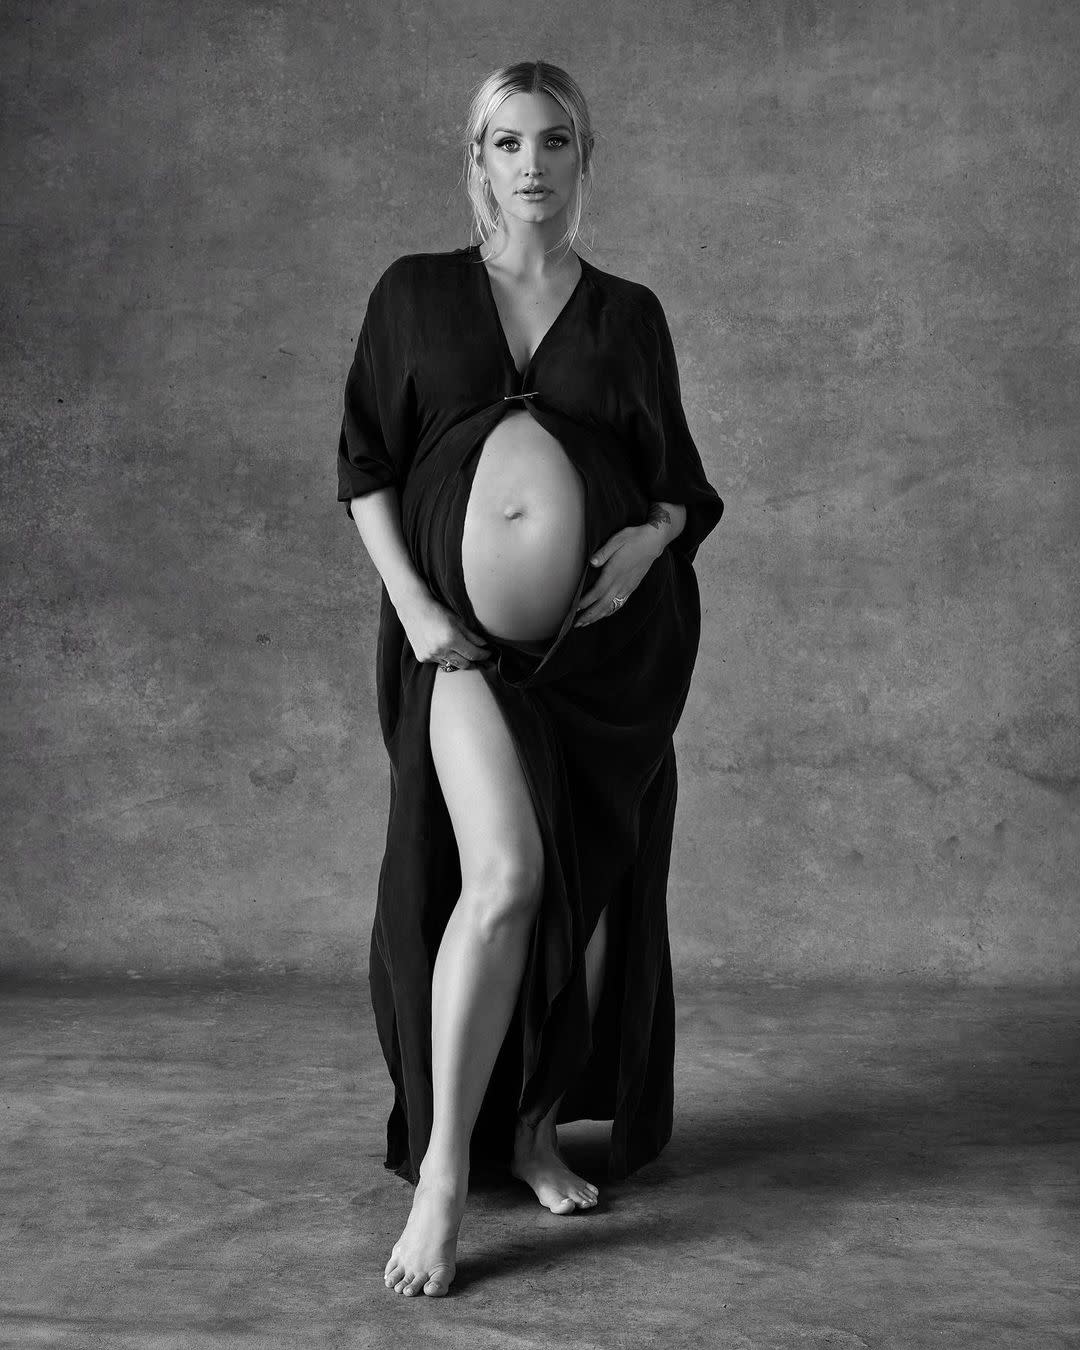 Pregnant Ashlee Simpson Cradles Bare Baby Bump in Stunning Maternity Shoot